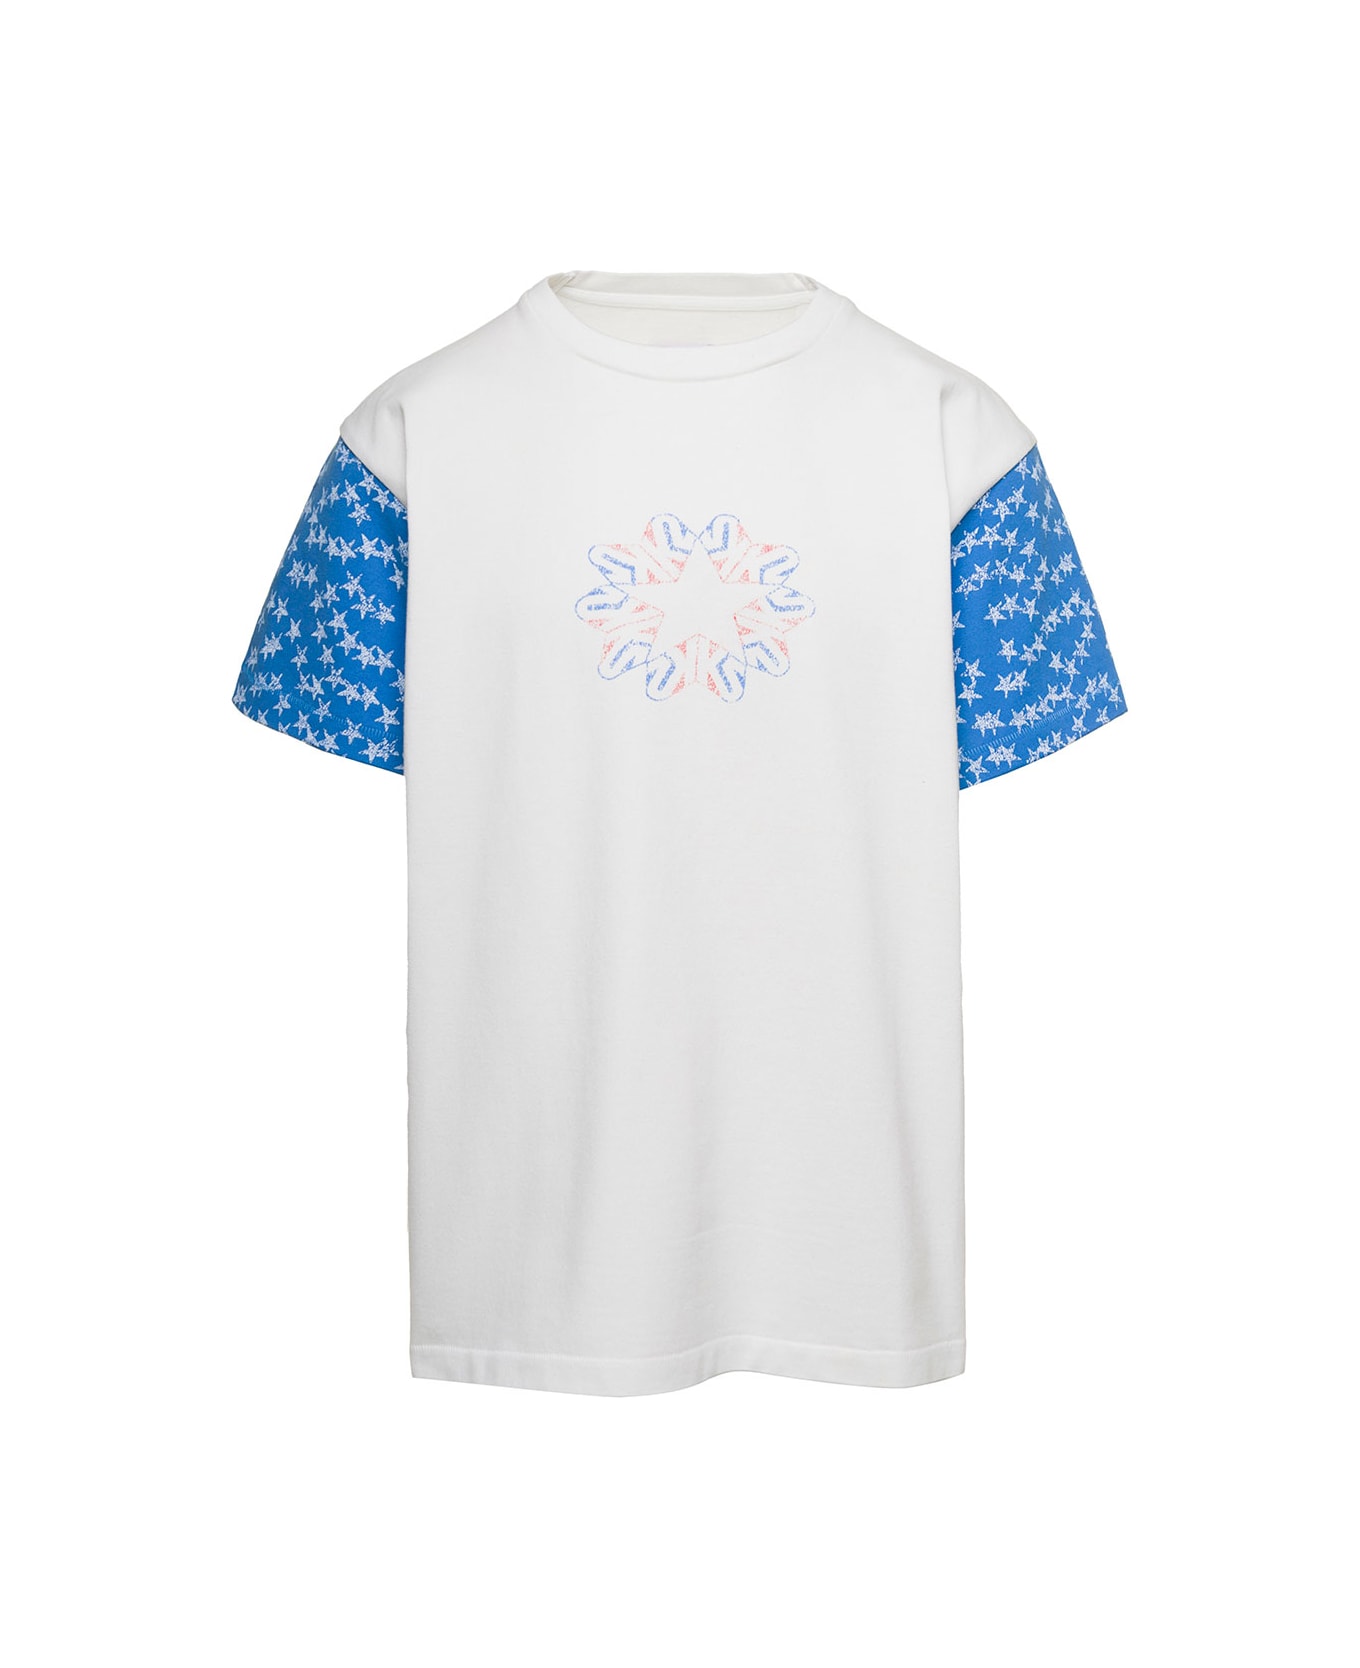 ERL White T-shirt With Graphic Print On Sleeve And Front In Cotton - White シャツ